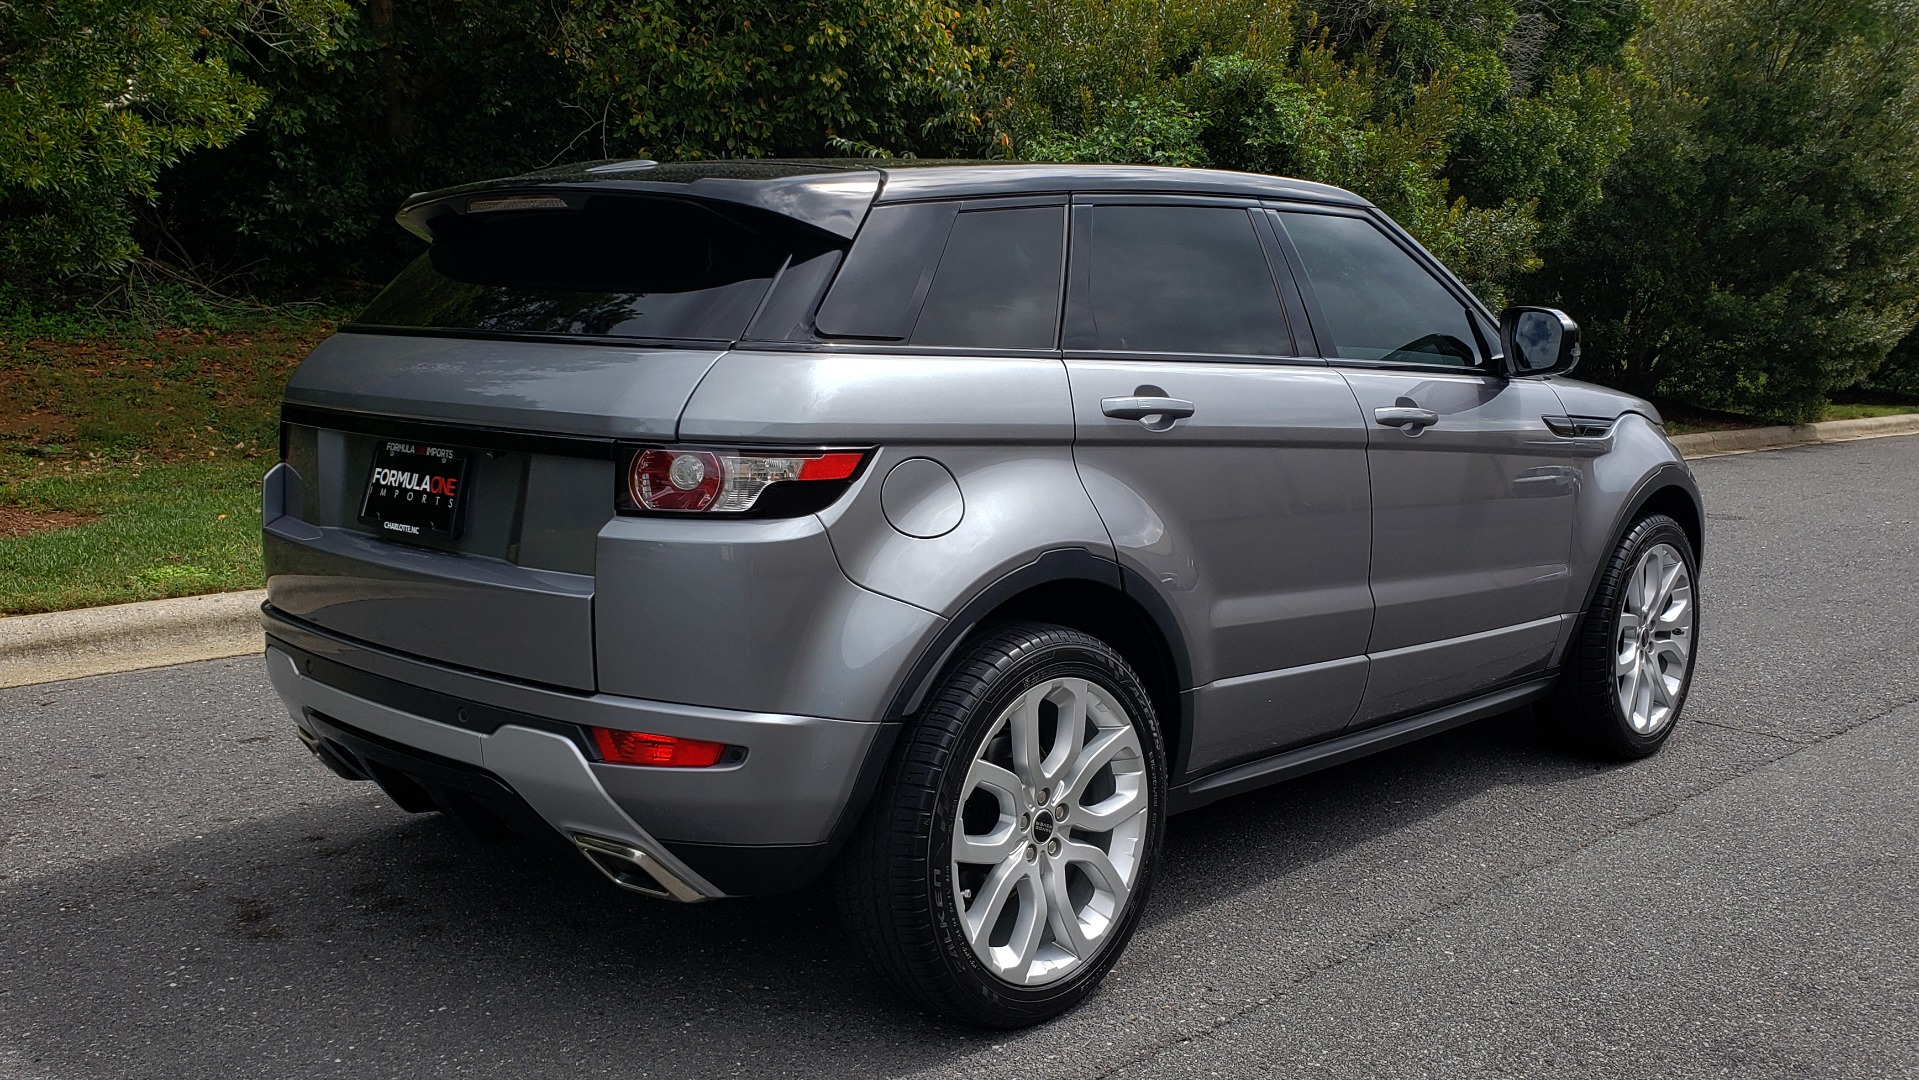 Used 2013 Land Rover RANGE ROVER EVOQUE DYNAMIC PREMIUM / NAV / PANO-ROOF / BLIND SPOT / REARVIEW for sale Sold at Formula Imports in Charlotte NC 28227 8